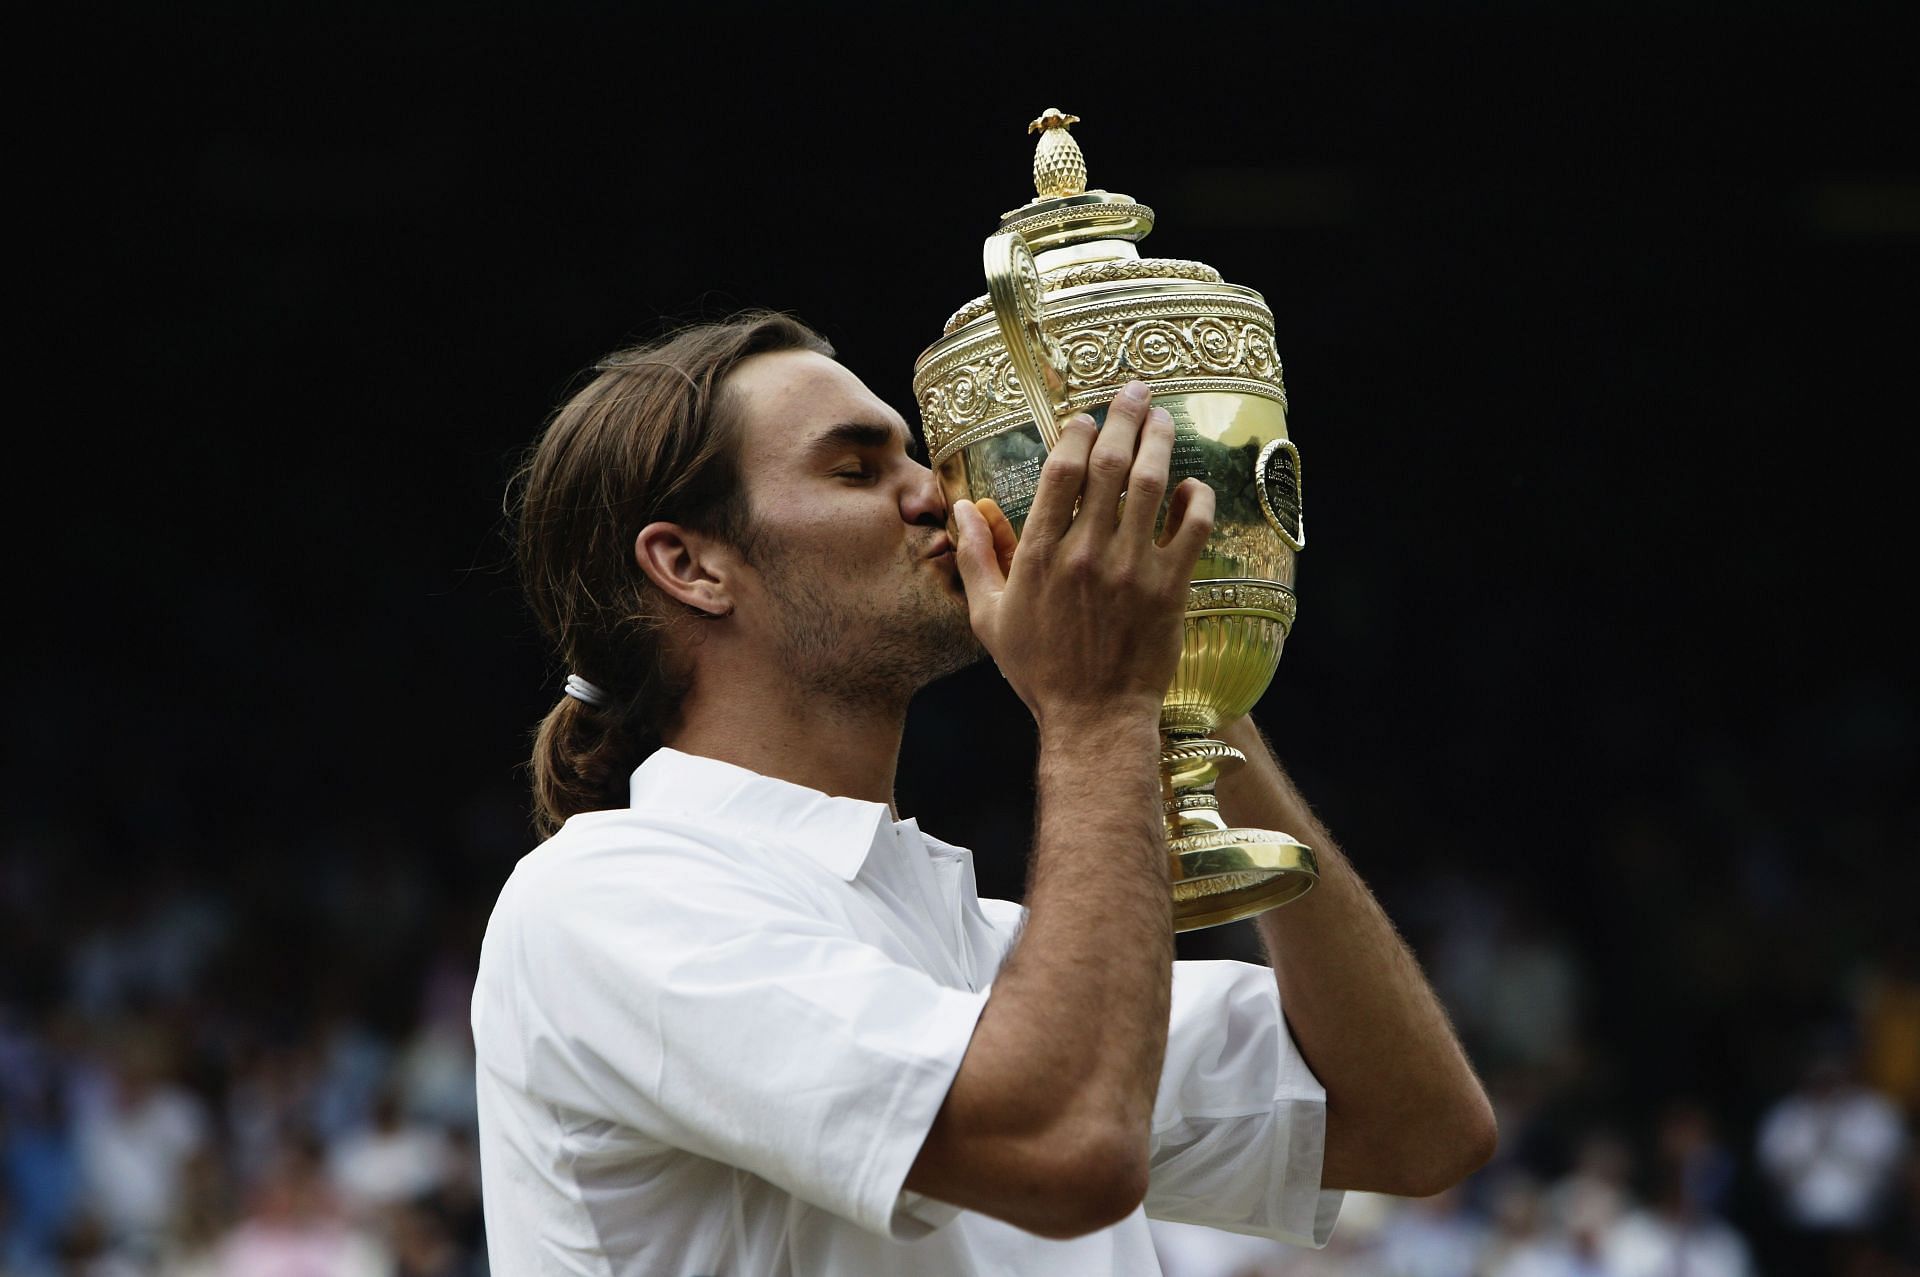 Roger Federer won his first Major title at Wimbledon in 2003.